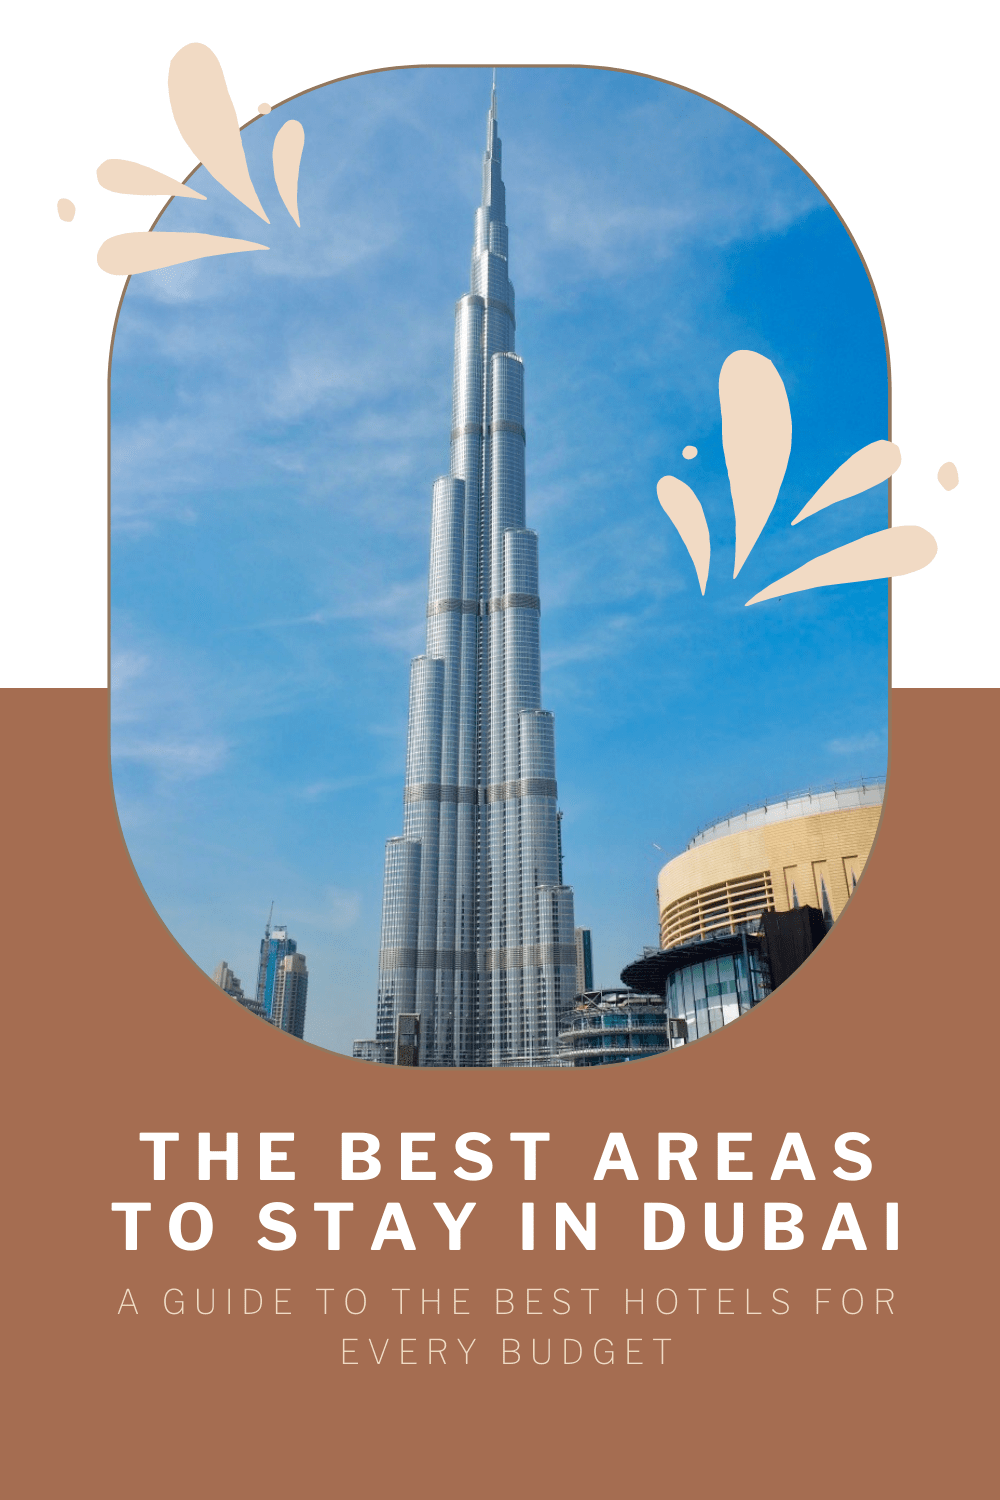 Places to stay in Dubai